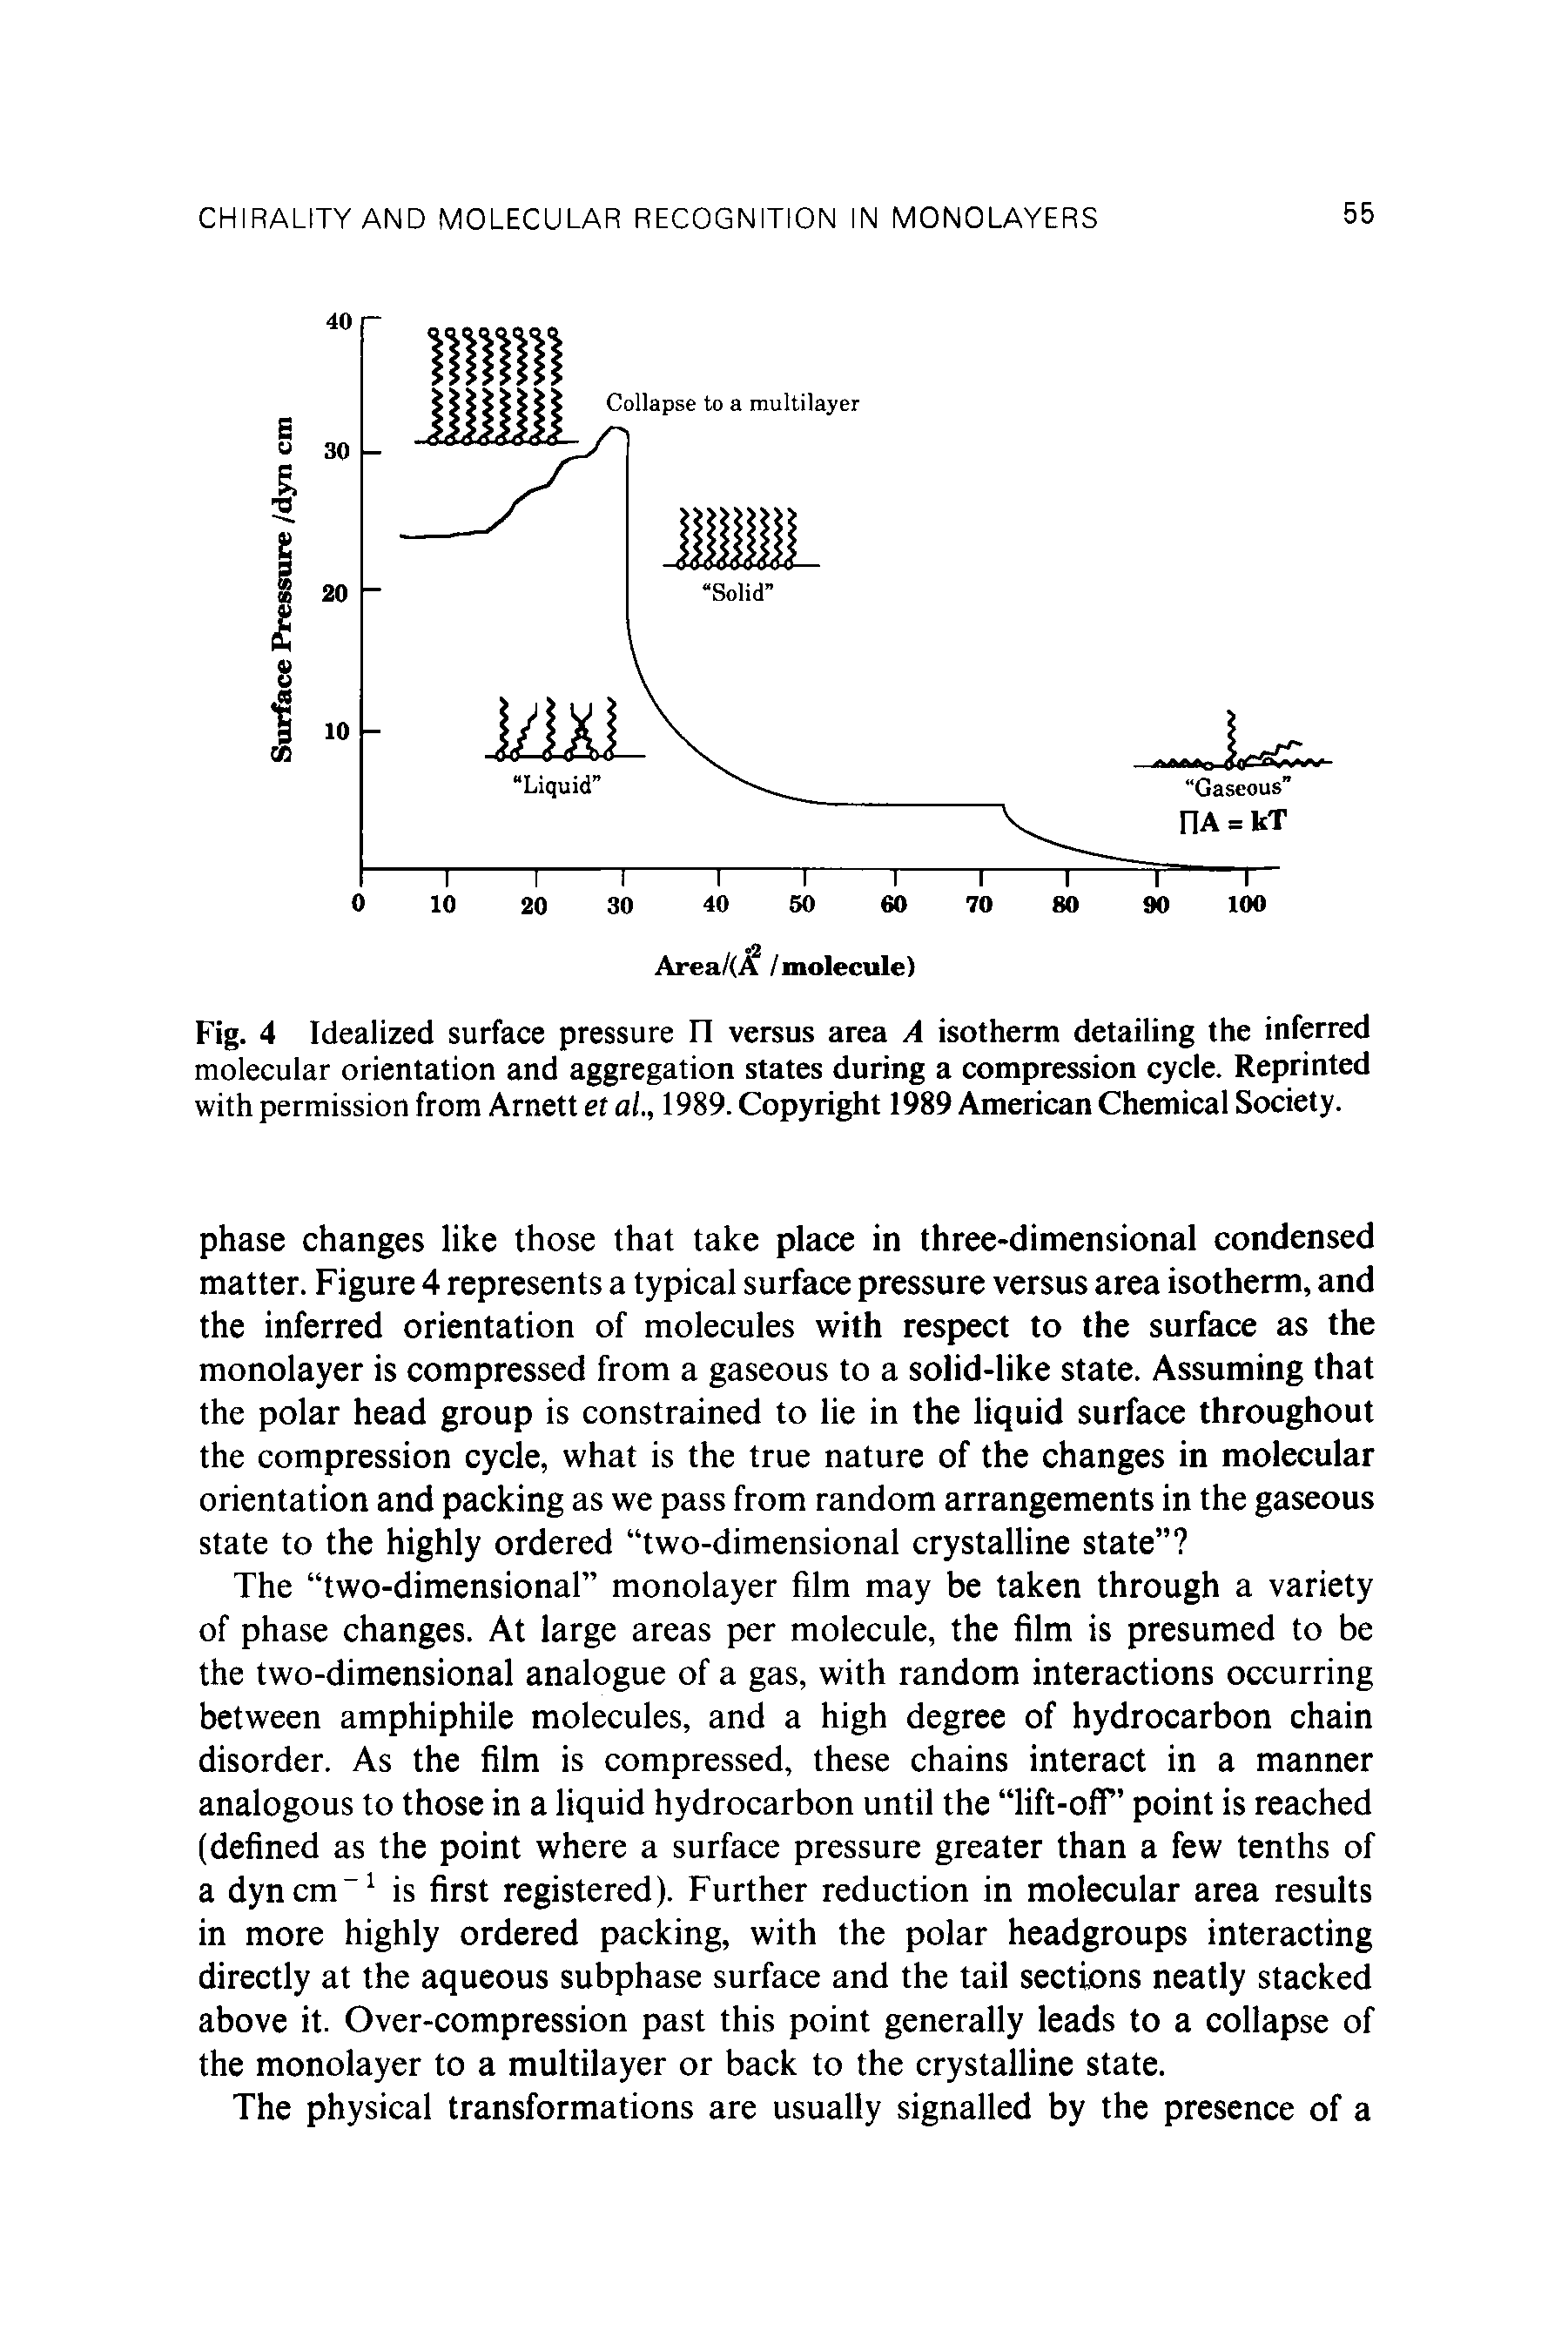 Fig. 4 Idealized surface pressure n versus area A isotherm detailing the inferred molecular orientation and aggregation states during a compression cycle. Reprinted with permission from Arnett et al, 1989. Copyright 1989 American Chemical Society.